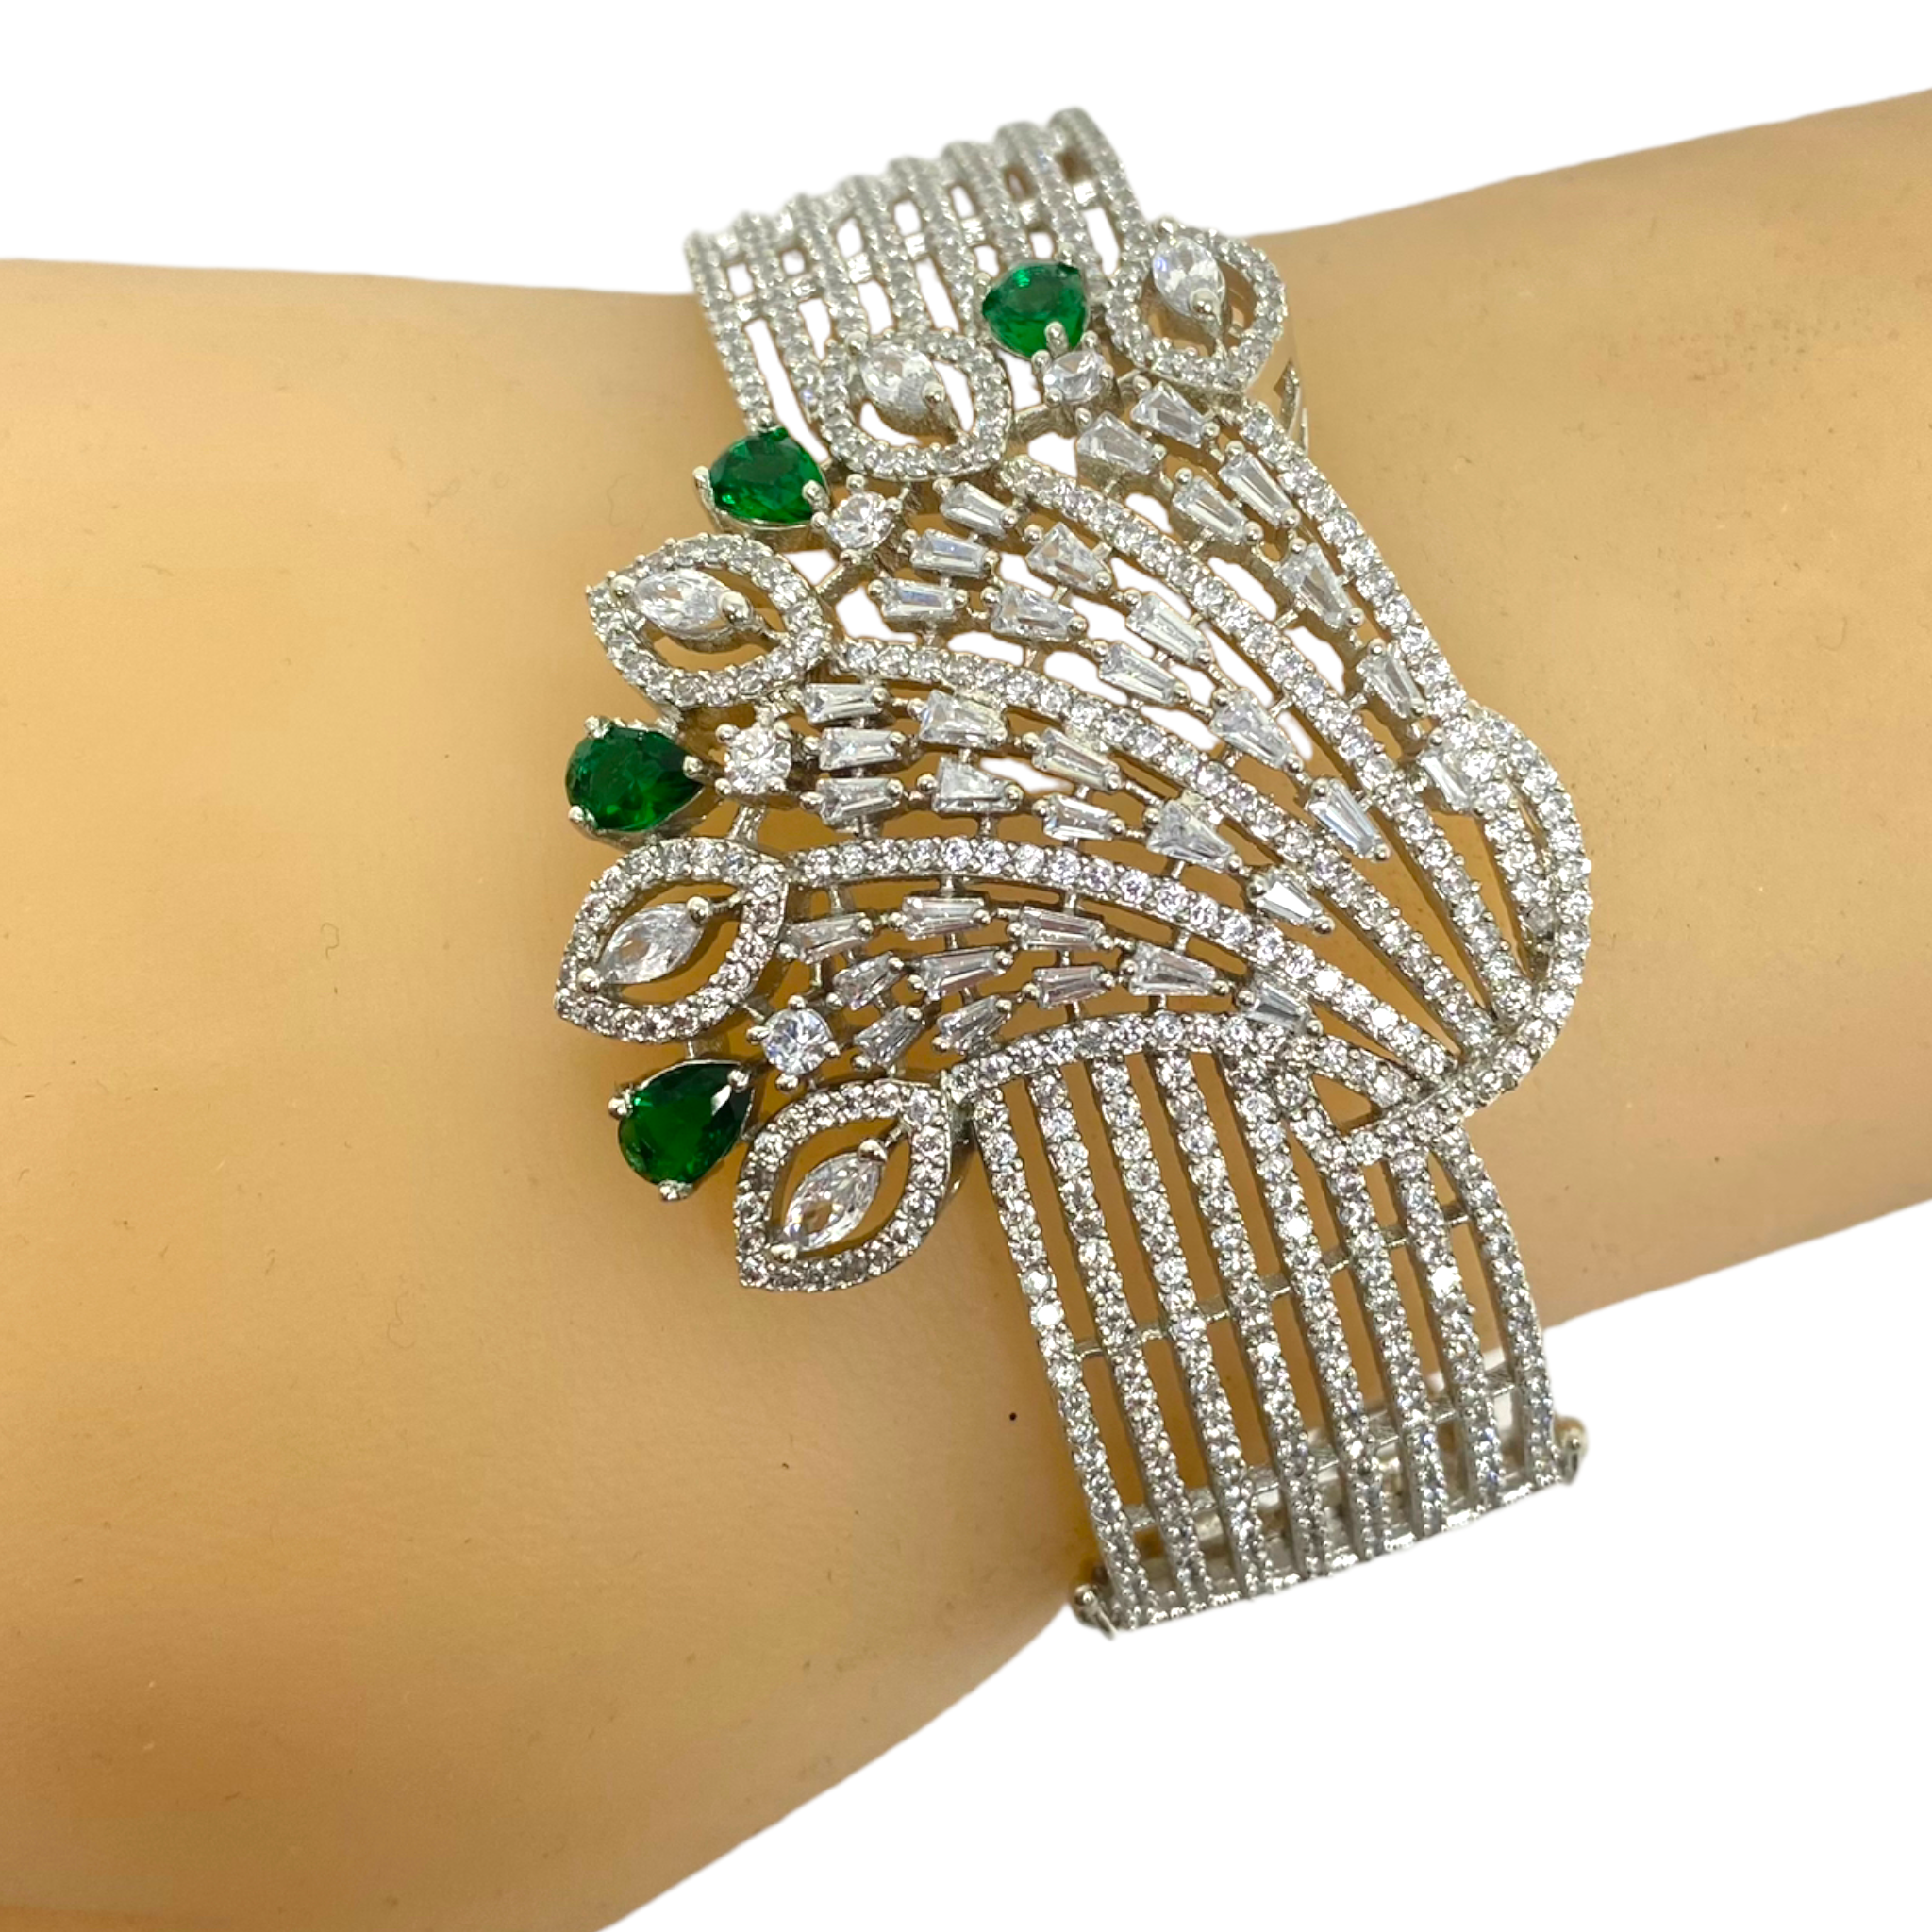 Buy SARAF RS JEWELLERY Beautiful Round Emerald Studded Bracelet Gold Plated  Green American Diamond Handcrafted For Women & Girls at Amazon.in